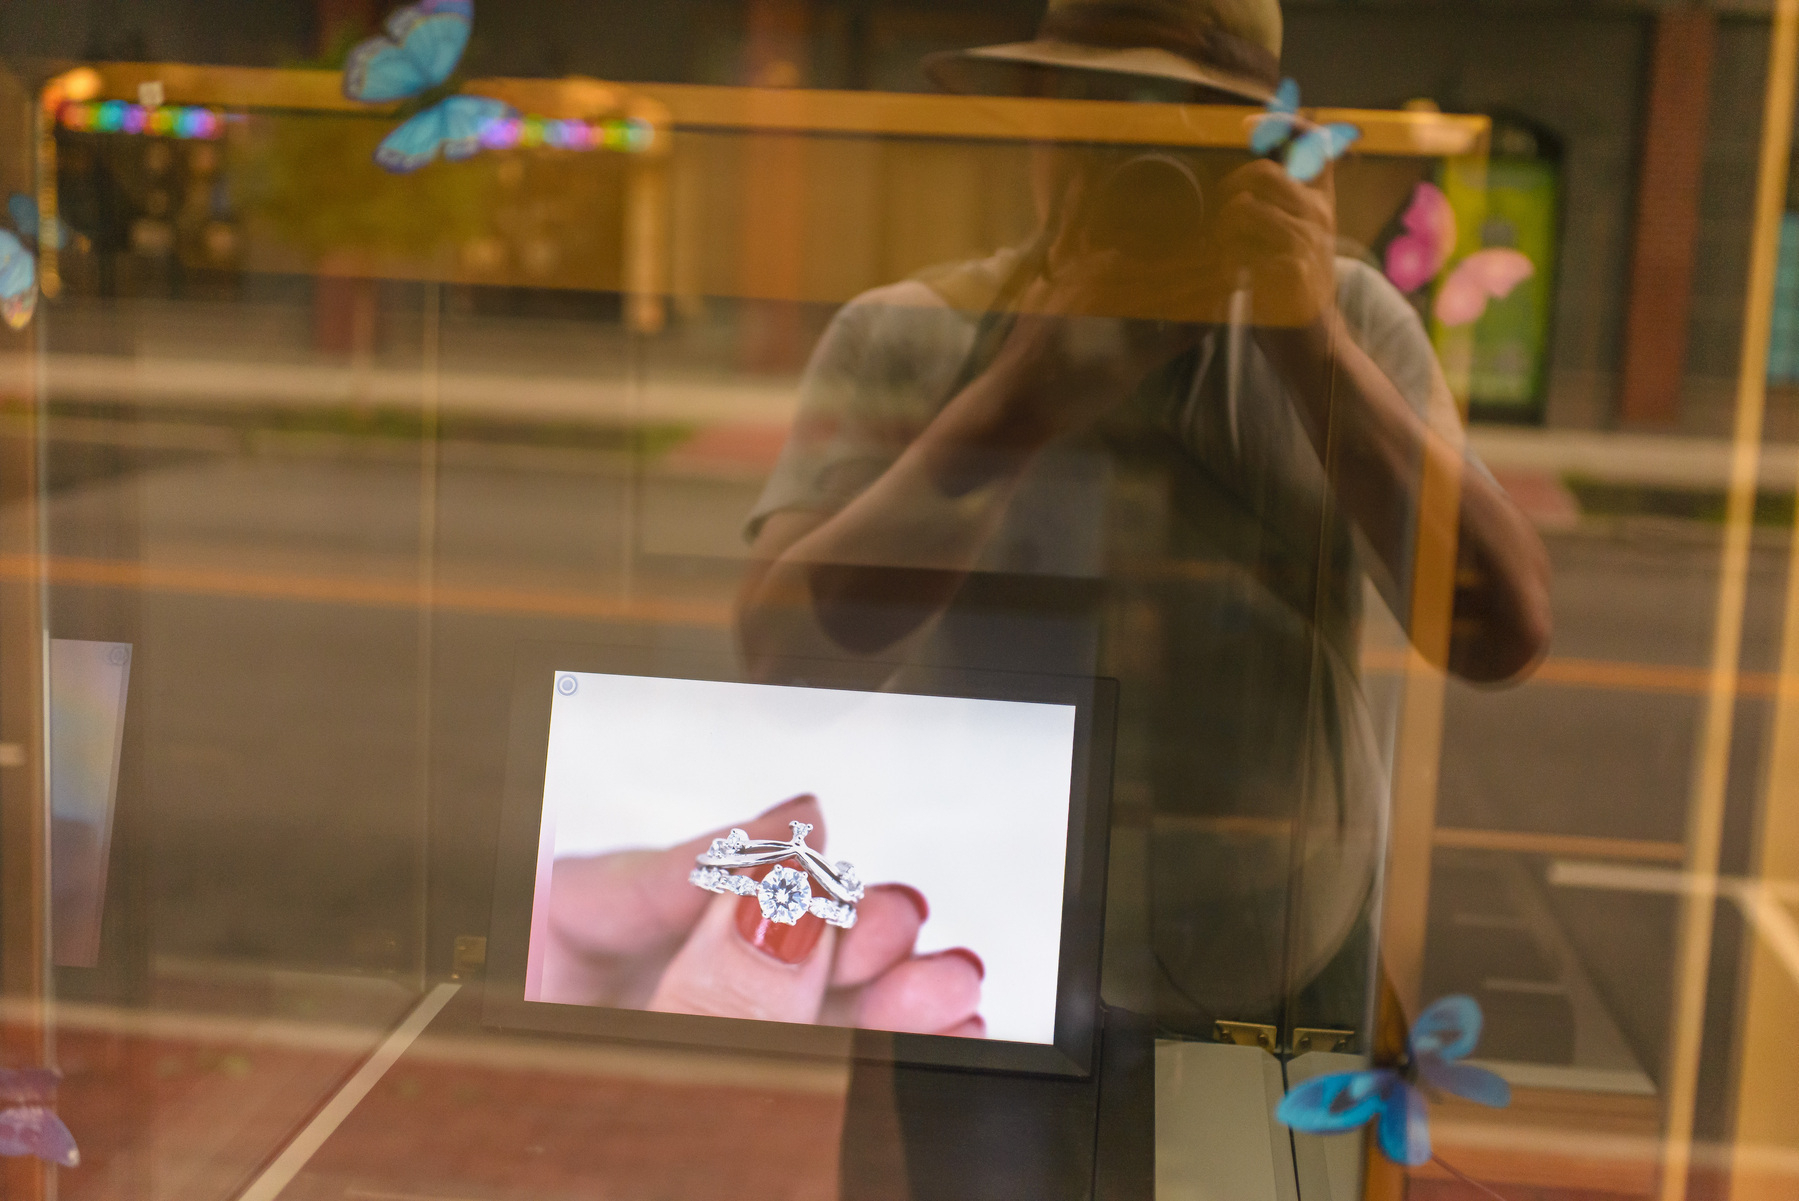 Shop window with display screen showing a woman hand with red nails holding a diamond ring. Photographer is reflected in the window along wit a streetscape.